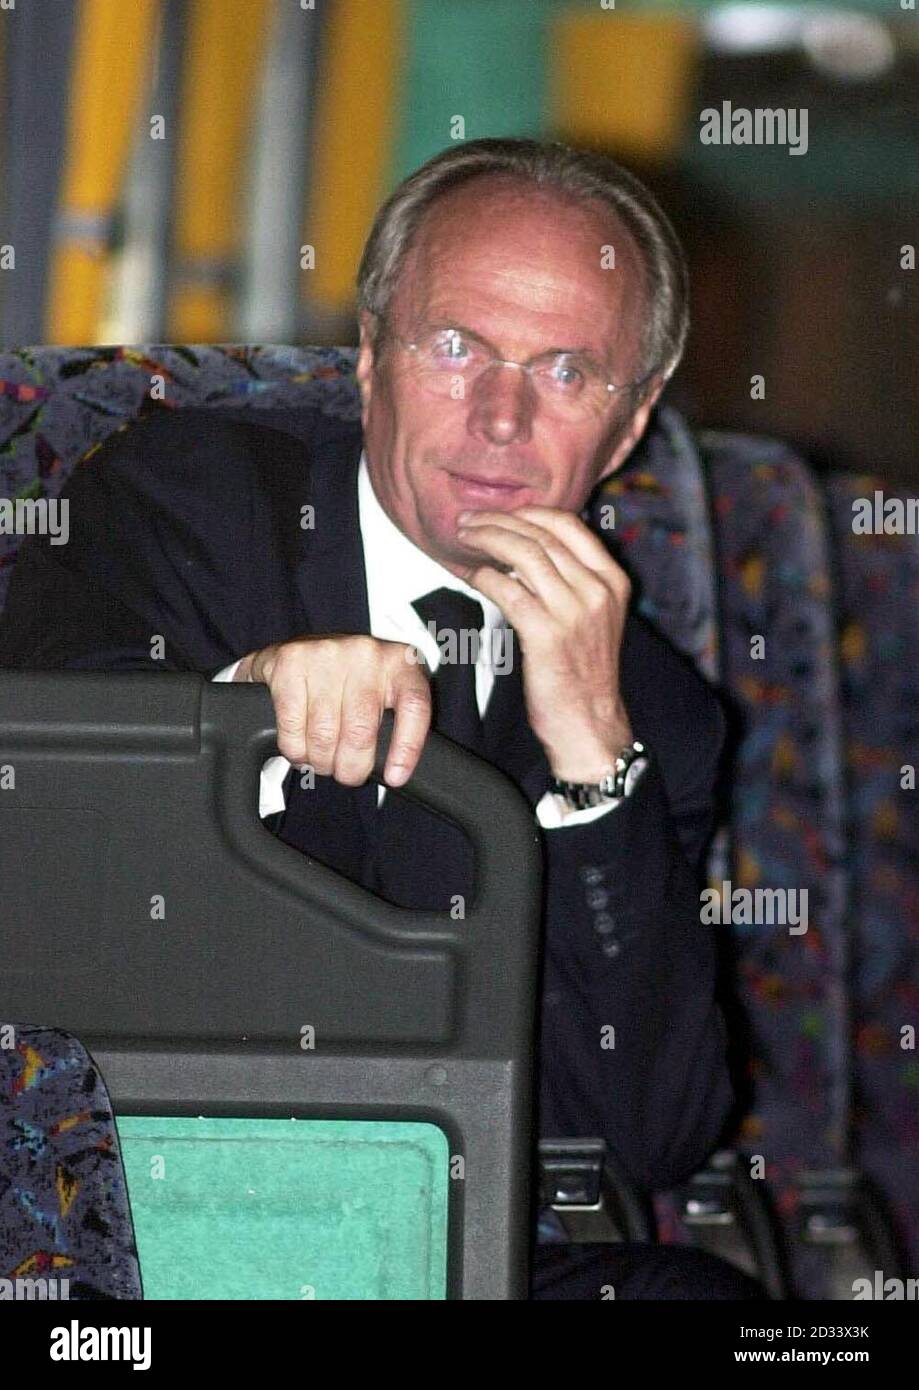 England manager Sven-Goran Eriksson onboard the team coach at Heathrow Airport, London. The England team have arrived back from Japan after being knocked out by Brazil in the quarter-finals of the 2002 World Cup.  THIS PICTURE CAN ONLY BE USED WITHIN THE CONTEXT OF AN EDITORIAL FEATURE. NO WEBSITE/INTERNET USE UNLESS SITE IS REGISTERED WITH FOOTBALL ASSOCIATION PREMIER LEAGUE. Stock Photo